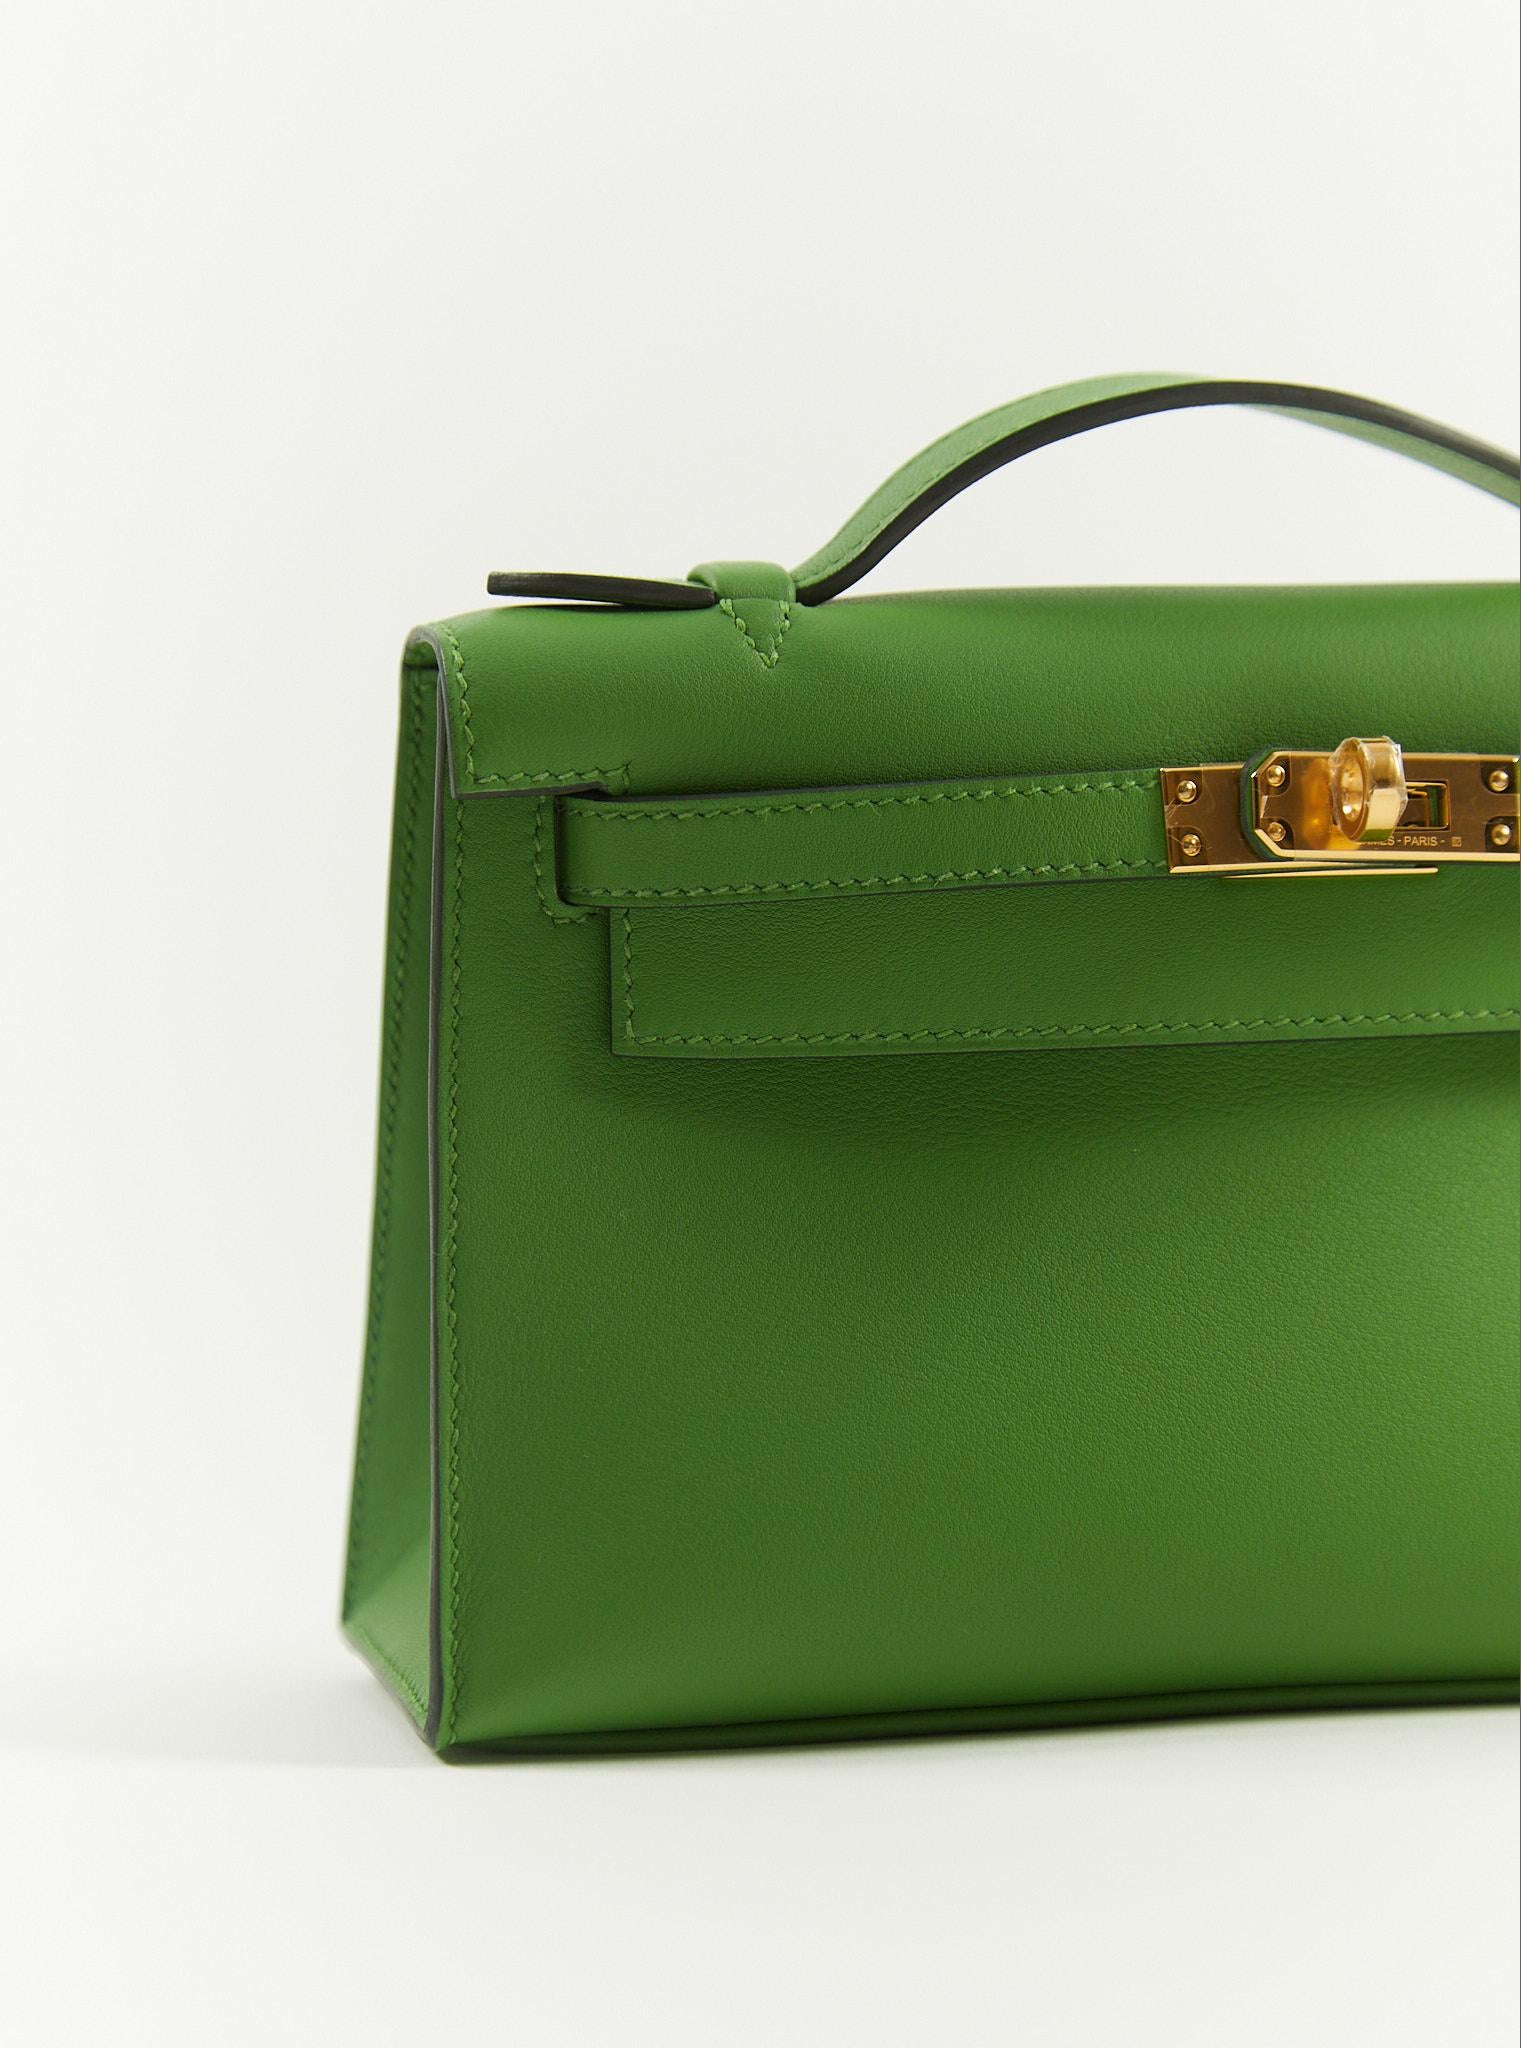 HERMÈS KELLY POCHETTE VERT YUCCA Swift Leather with Gold Hardware In Excellent Condition For Sale In London, GB